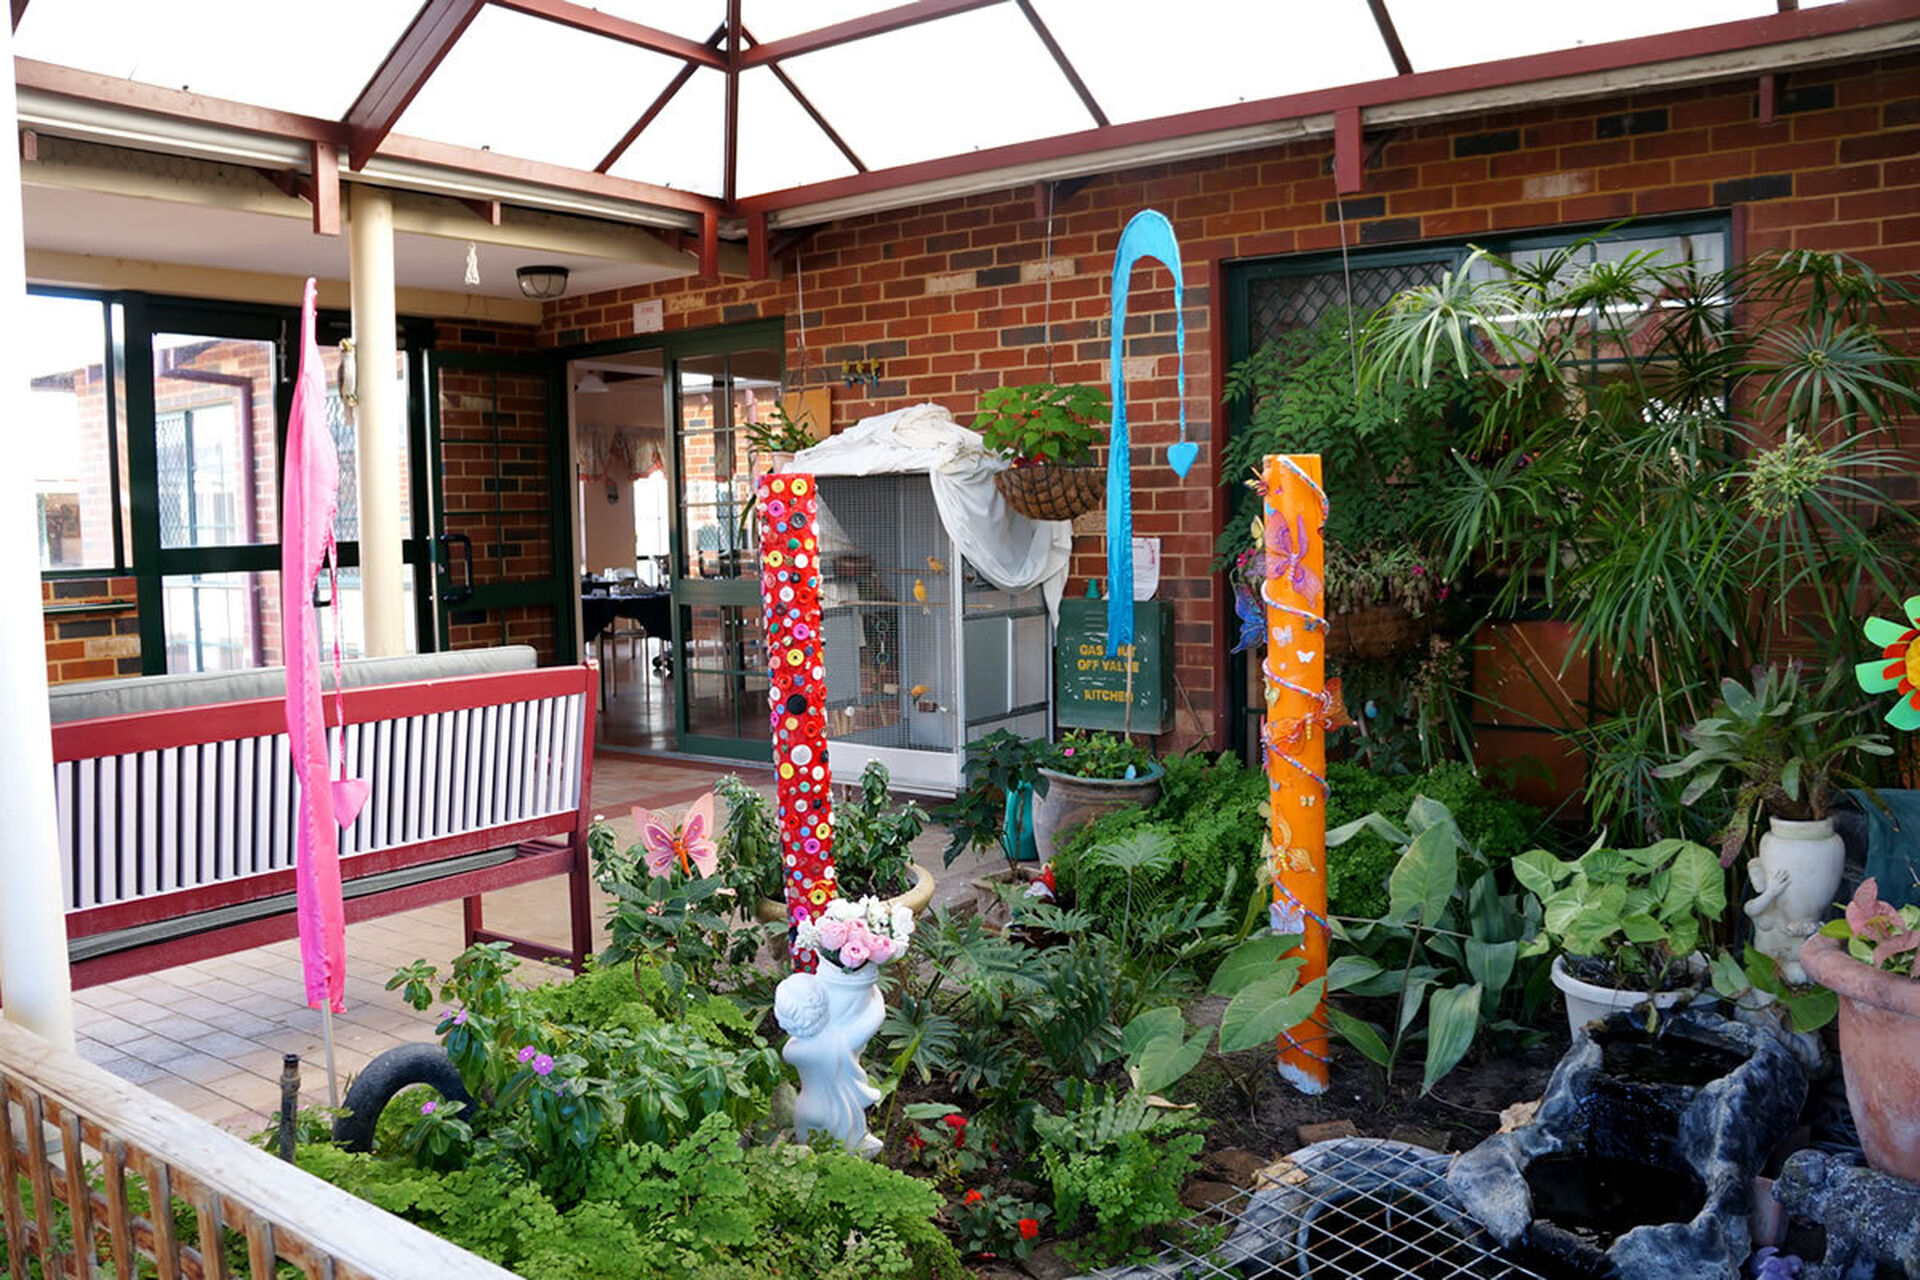 interior garden at baptistcare william carey court aged care home in busselton wa for nursing home residents to explore